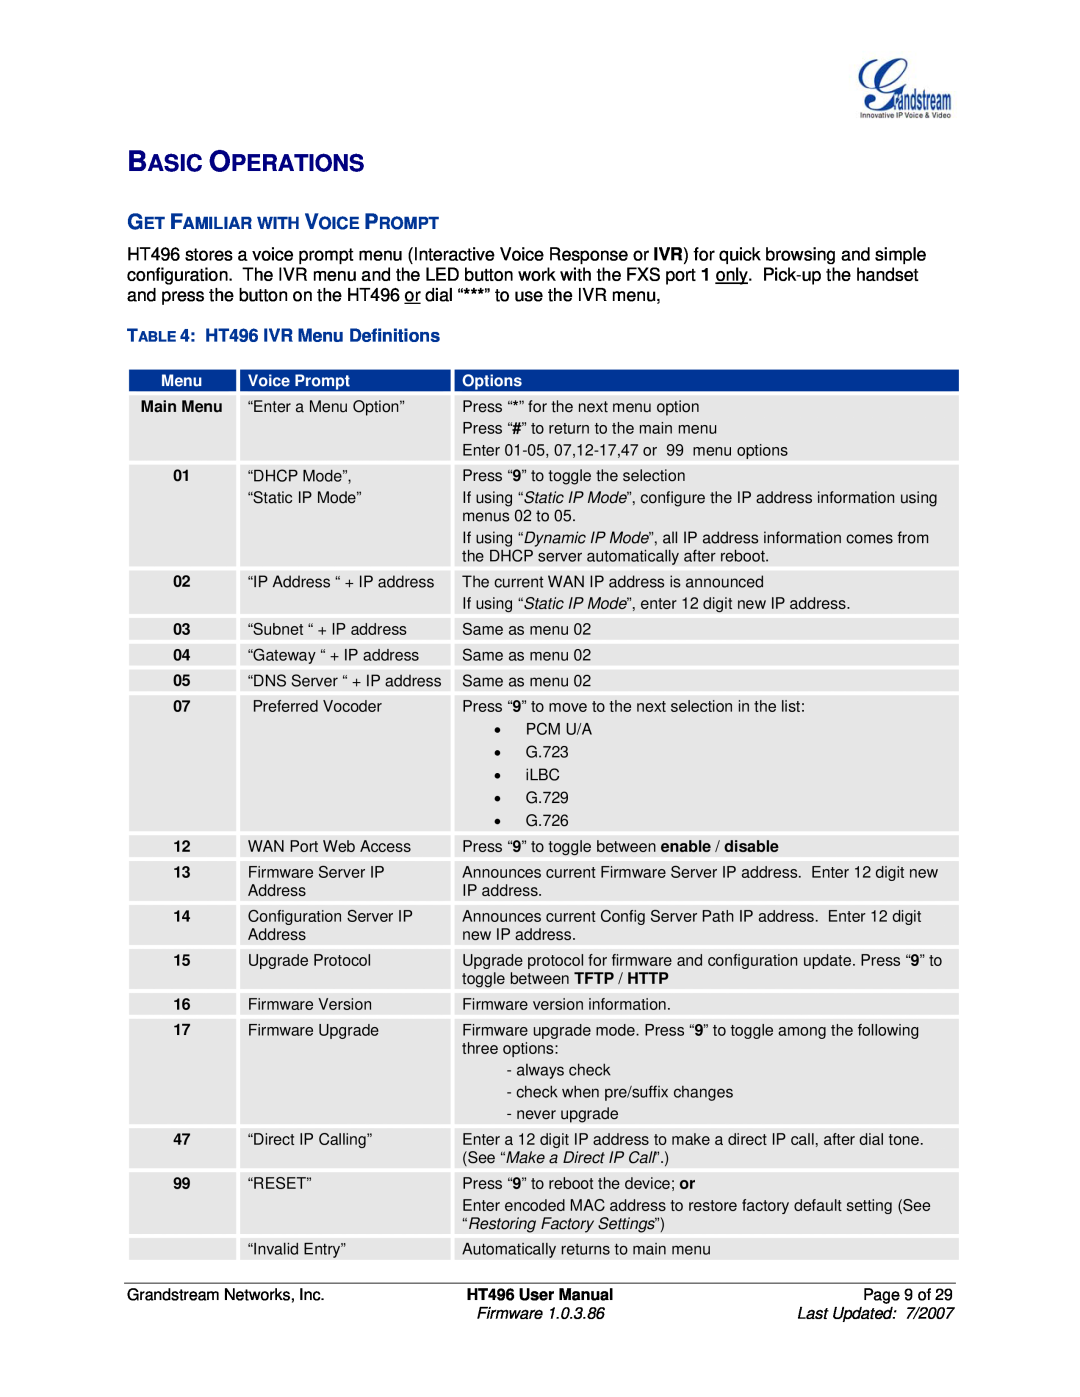 Grandstream Networks user manual Basic Operations, Get Familiar With Voice Prompt, HT496 IVR Menu Definitions, Options 